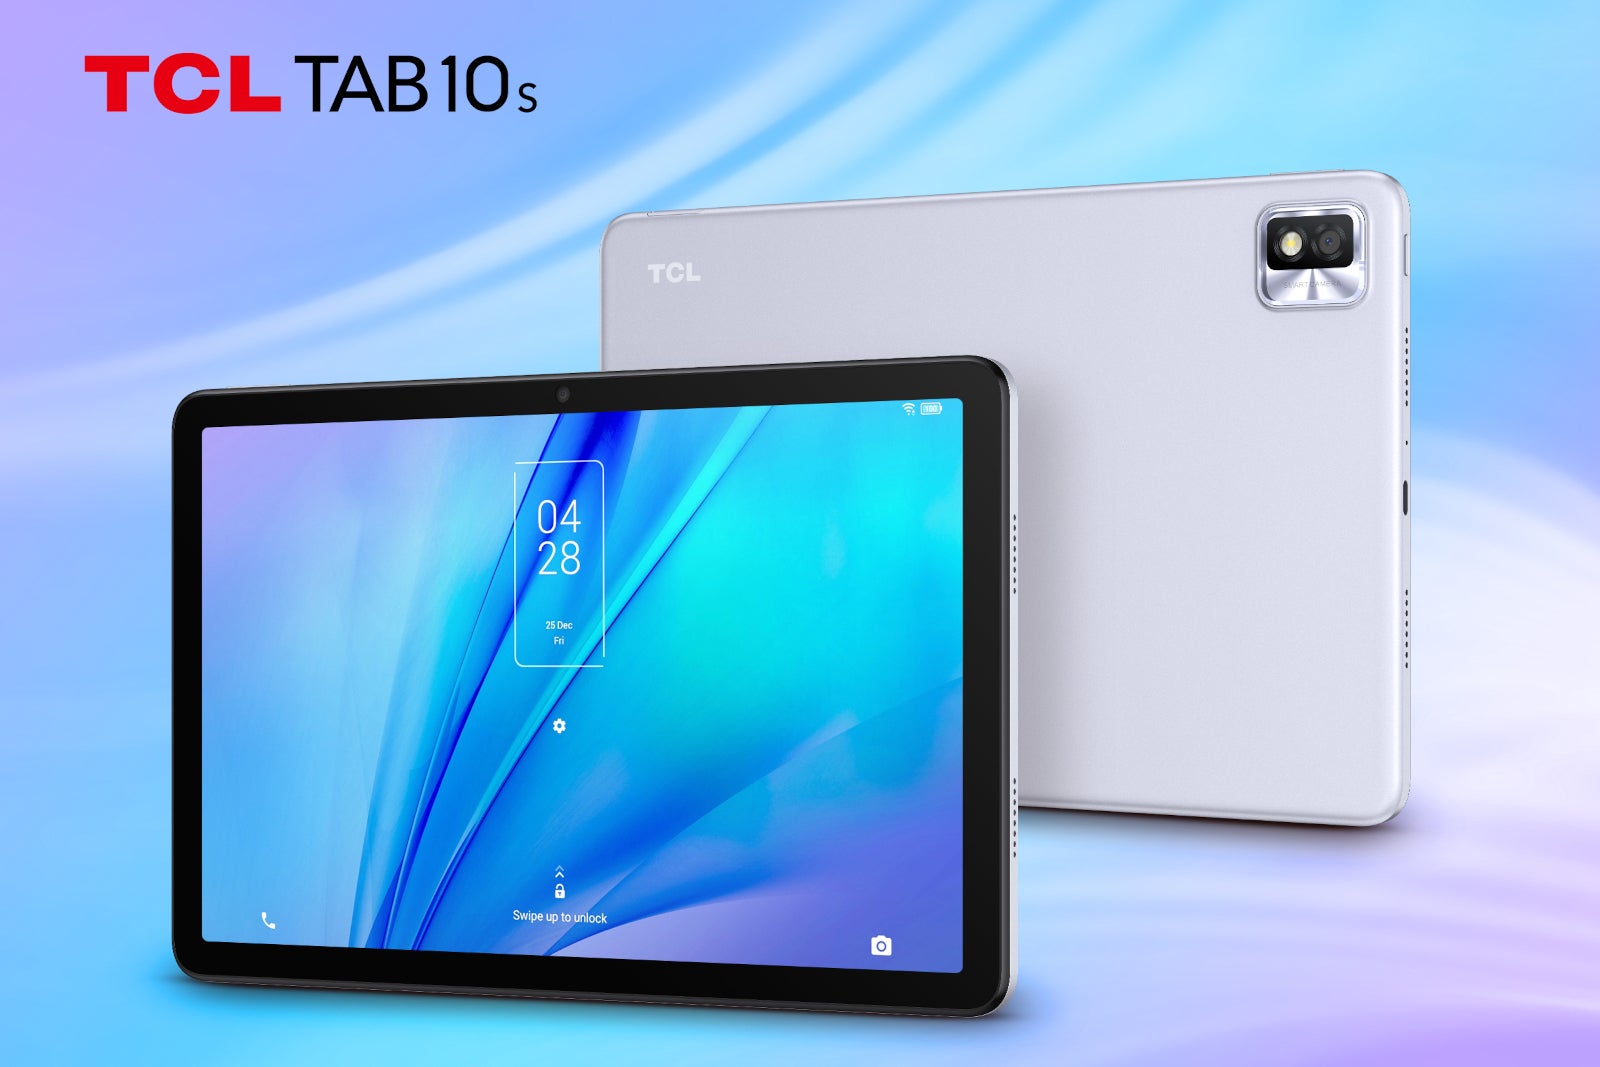 TCL Tab 10S - TCL's new Tab 10S and TCL NXTPAPER tablets focus on education, productivity